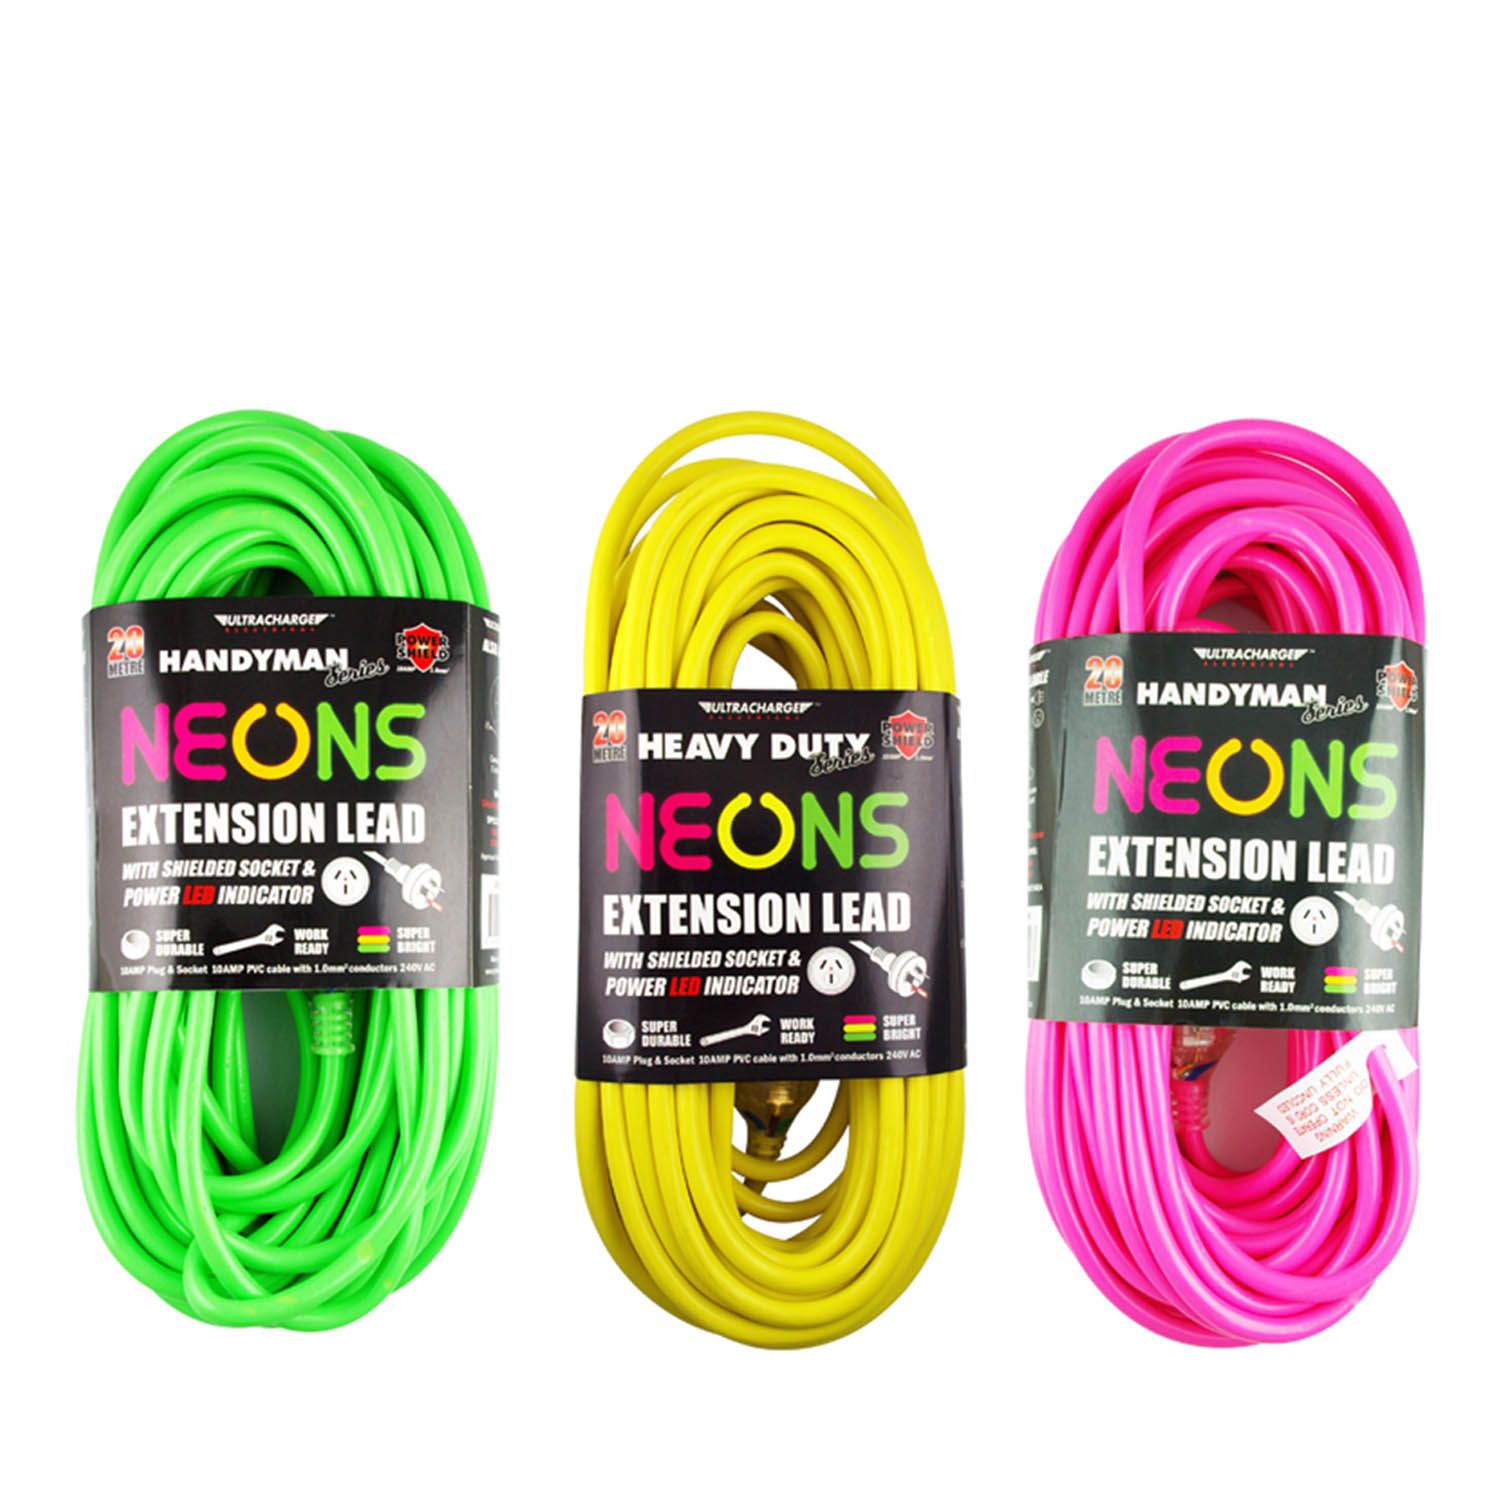 Ultracharge™ 10 Amp Heavy Duty Extension Lead Neon